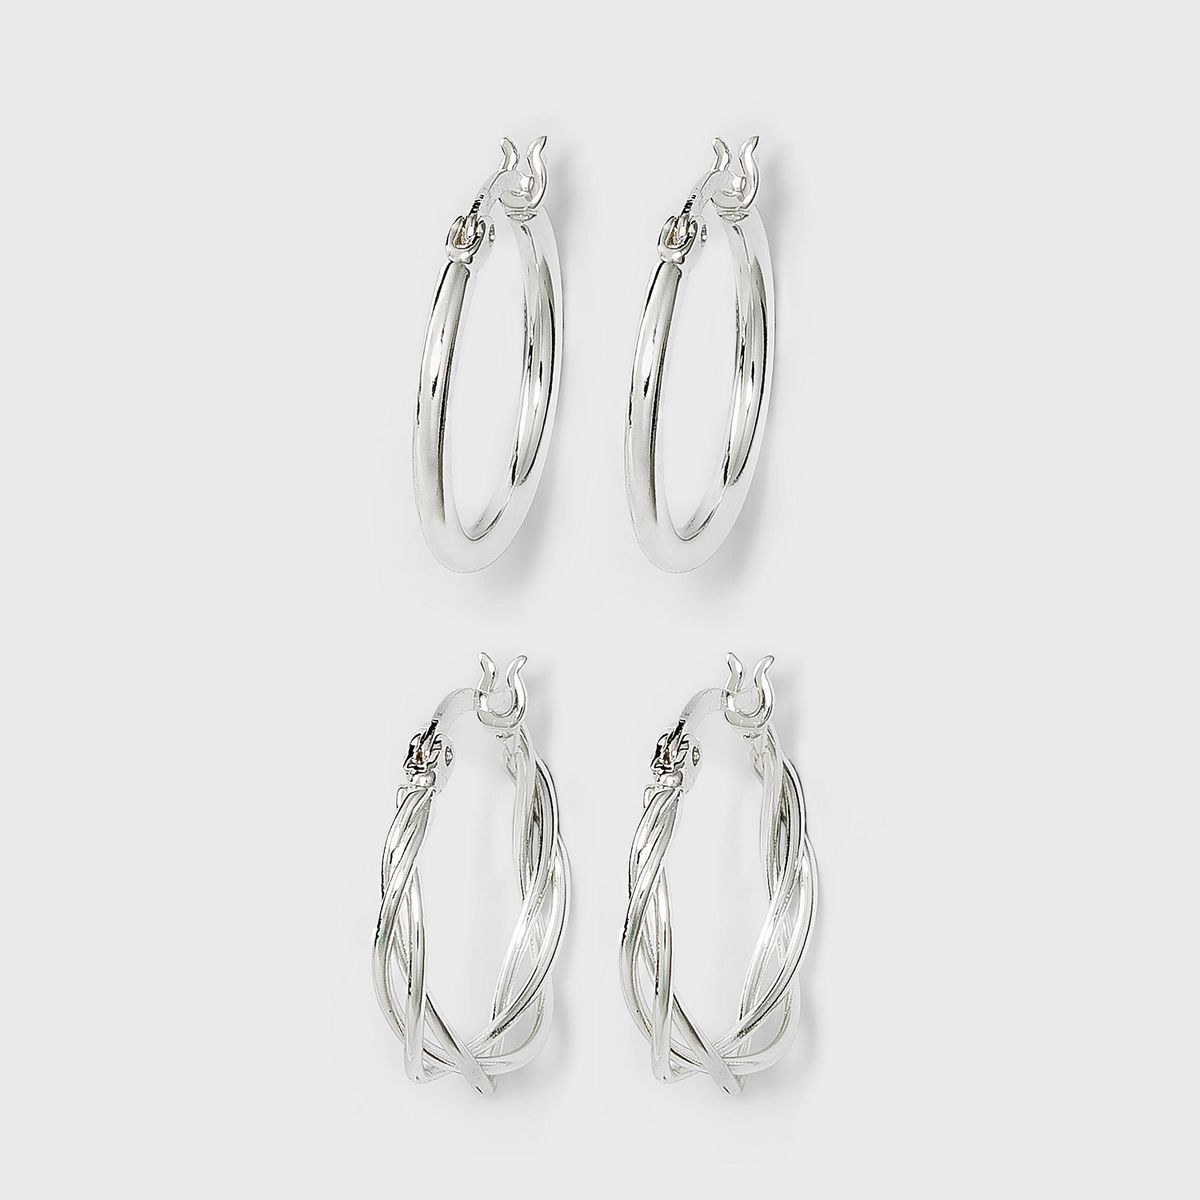 Silver Plated Braided and Polished Hoop Earring Set 2pc - A New Day™ Silver | Target